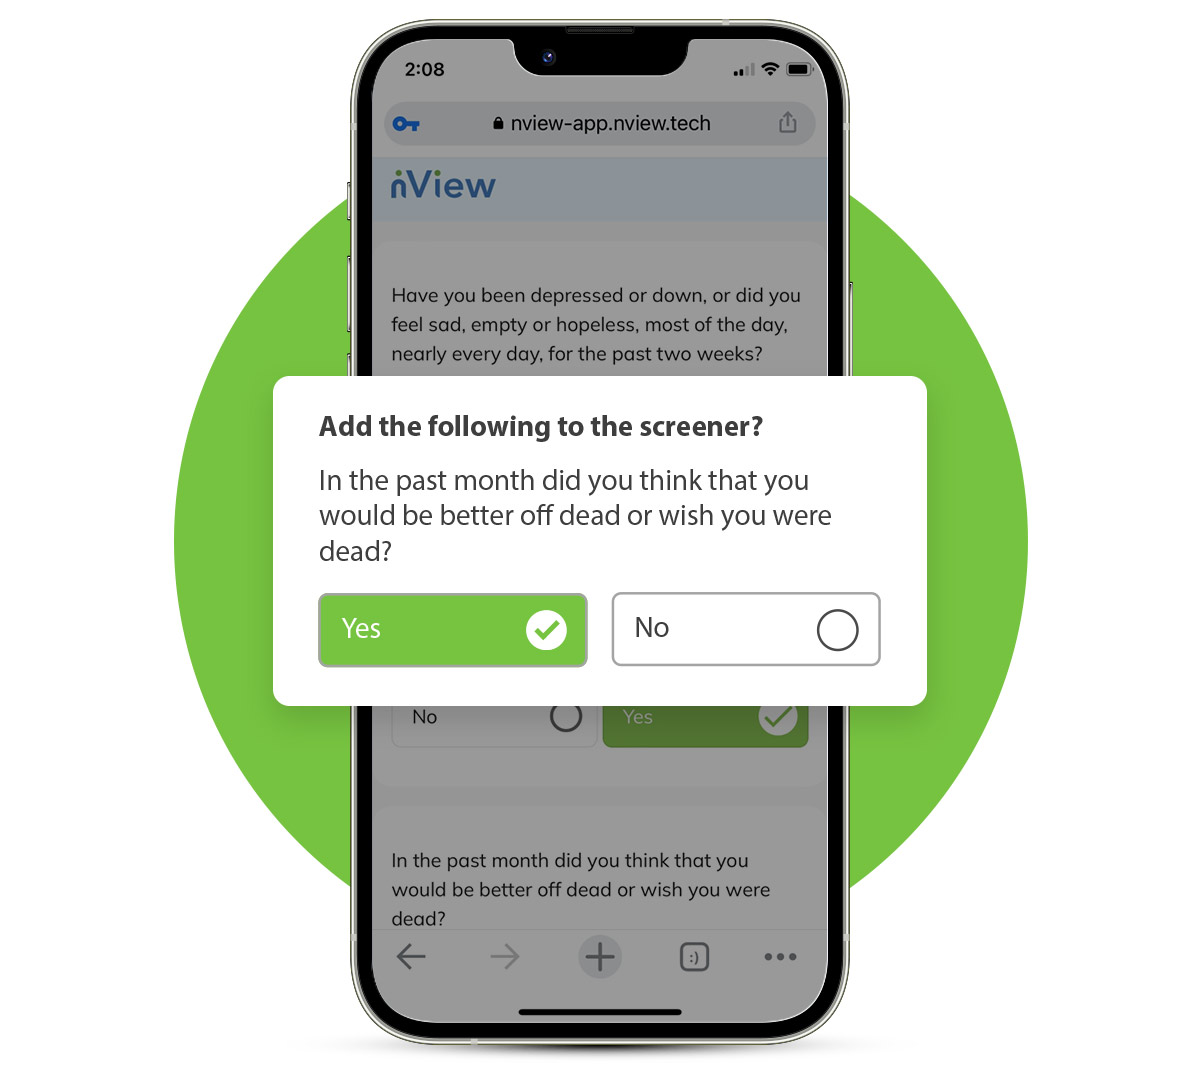 nView Takes Mental Health Care to the Next Level